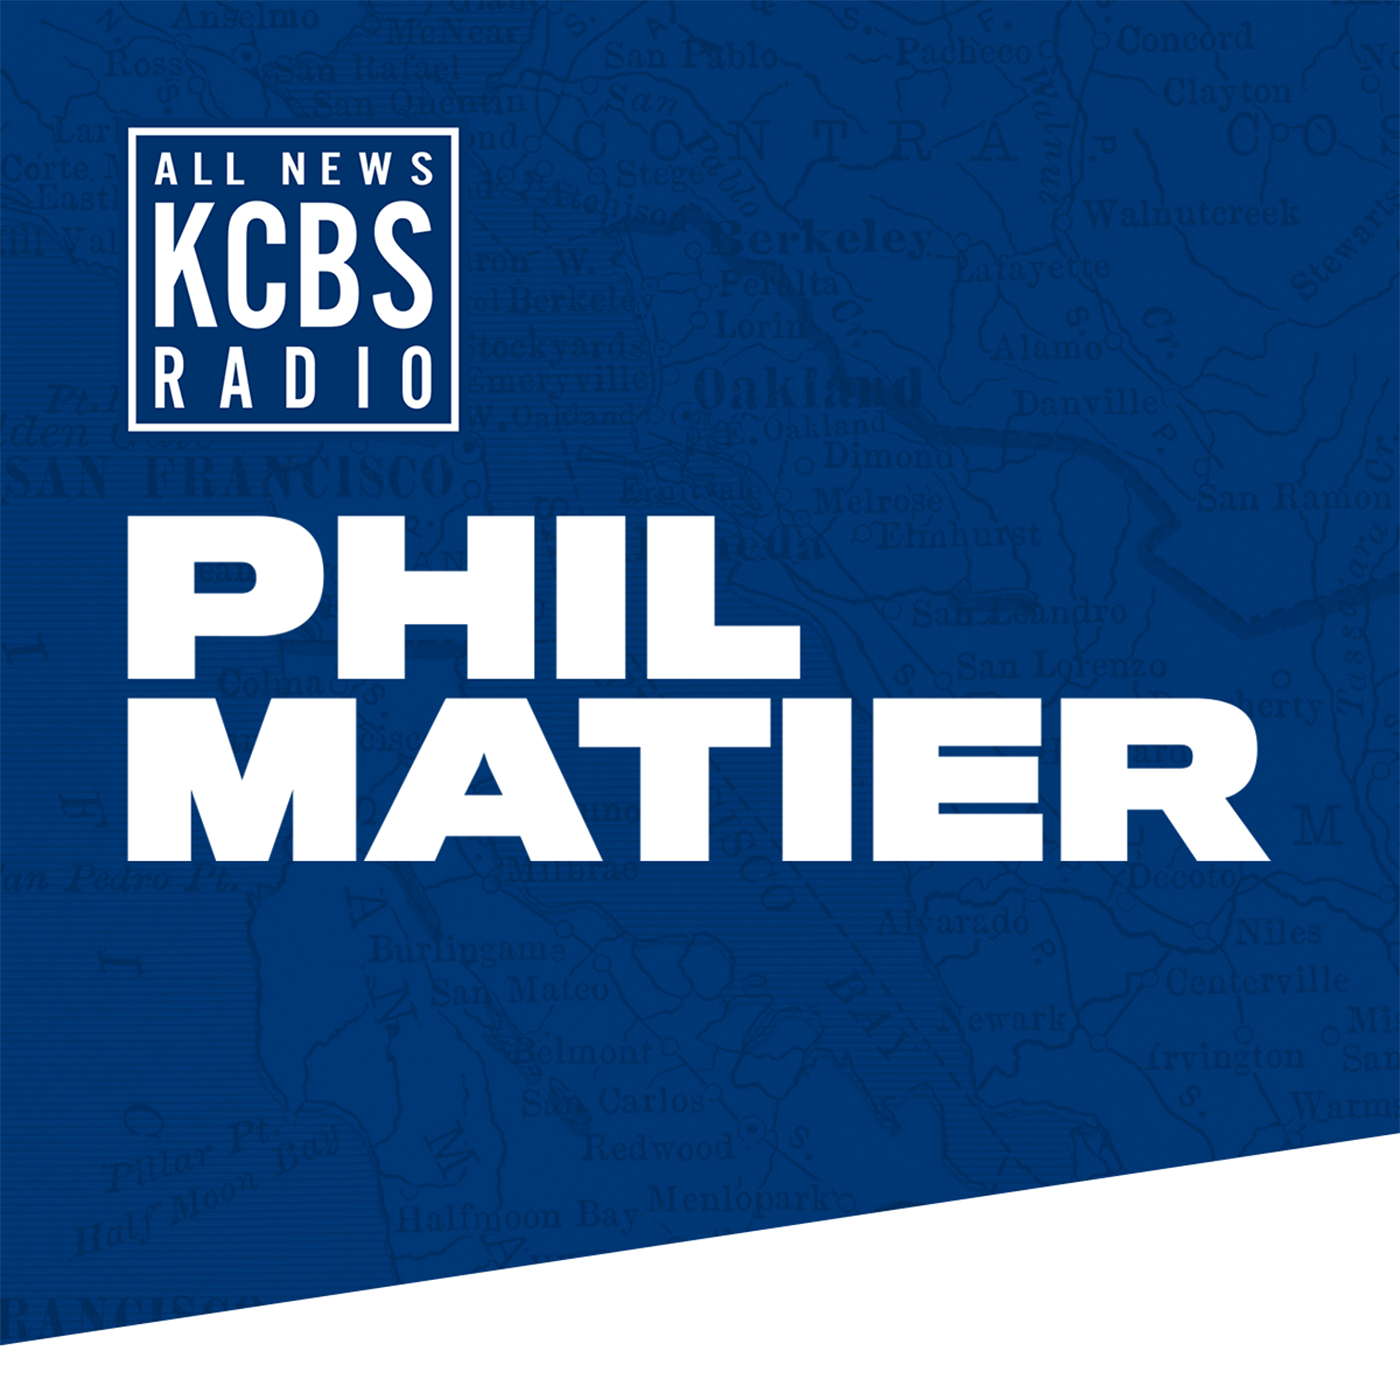 Phil Matier: Multiple counties expected to move to less restrictive reopening tier